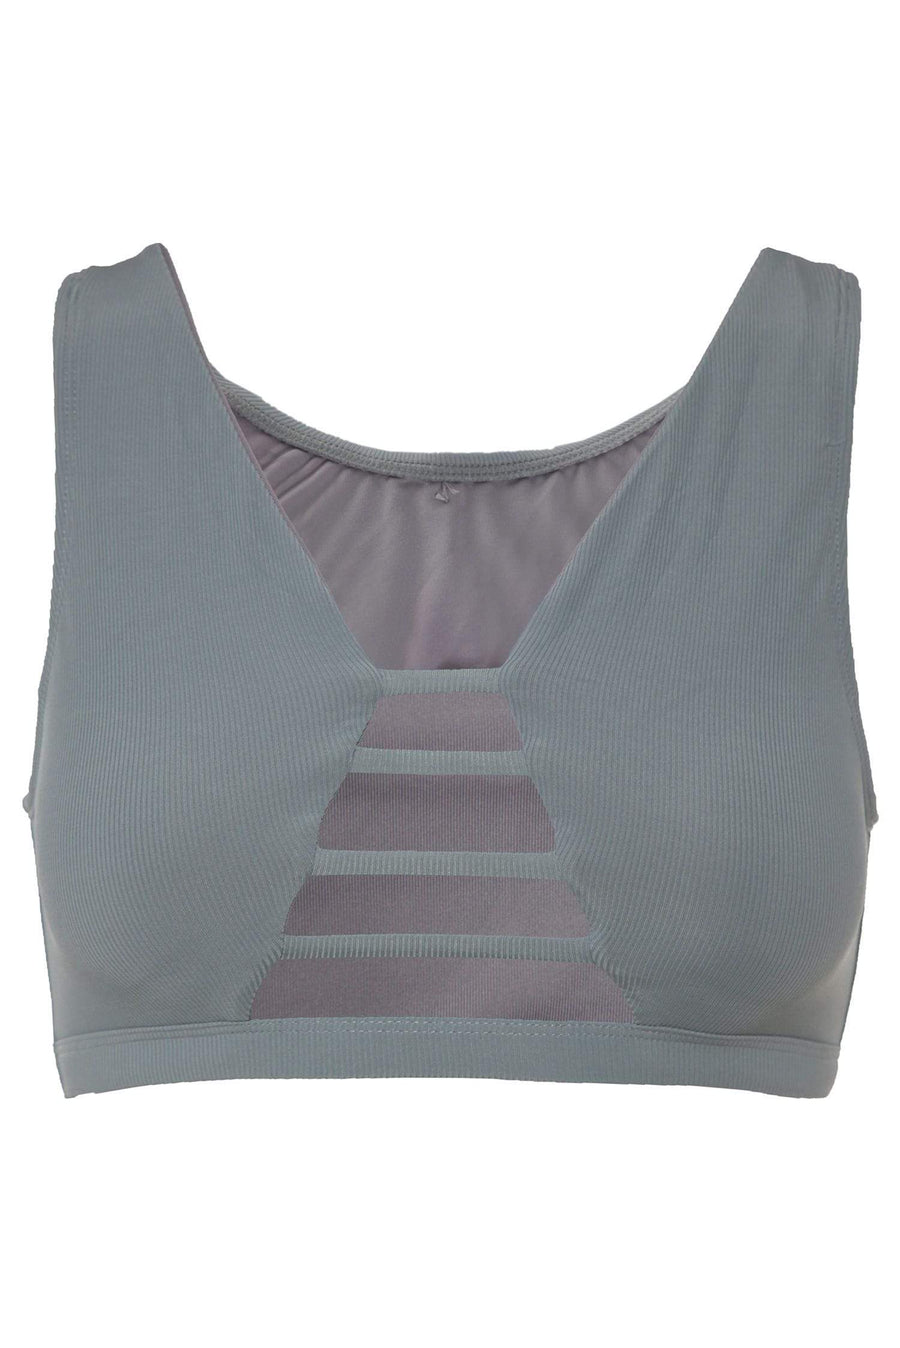 The Valley Top - Ribbed Light Grey Top